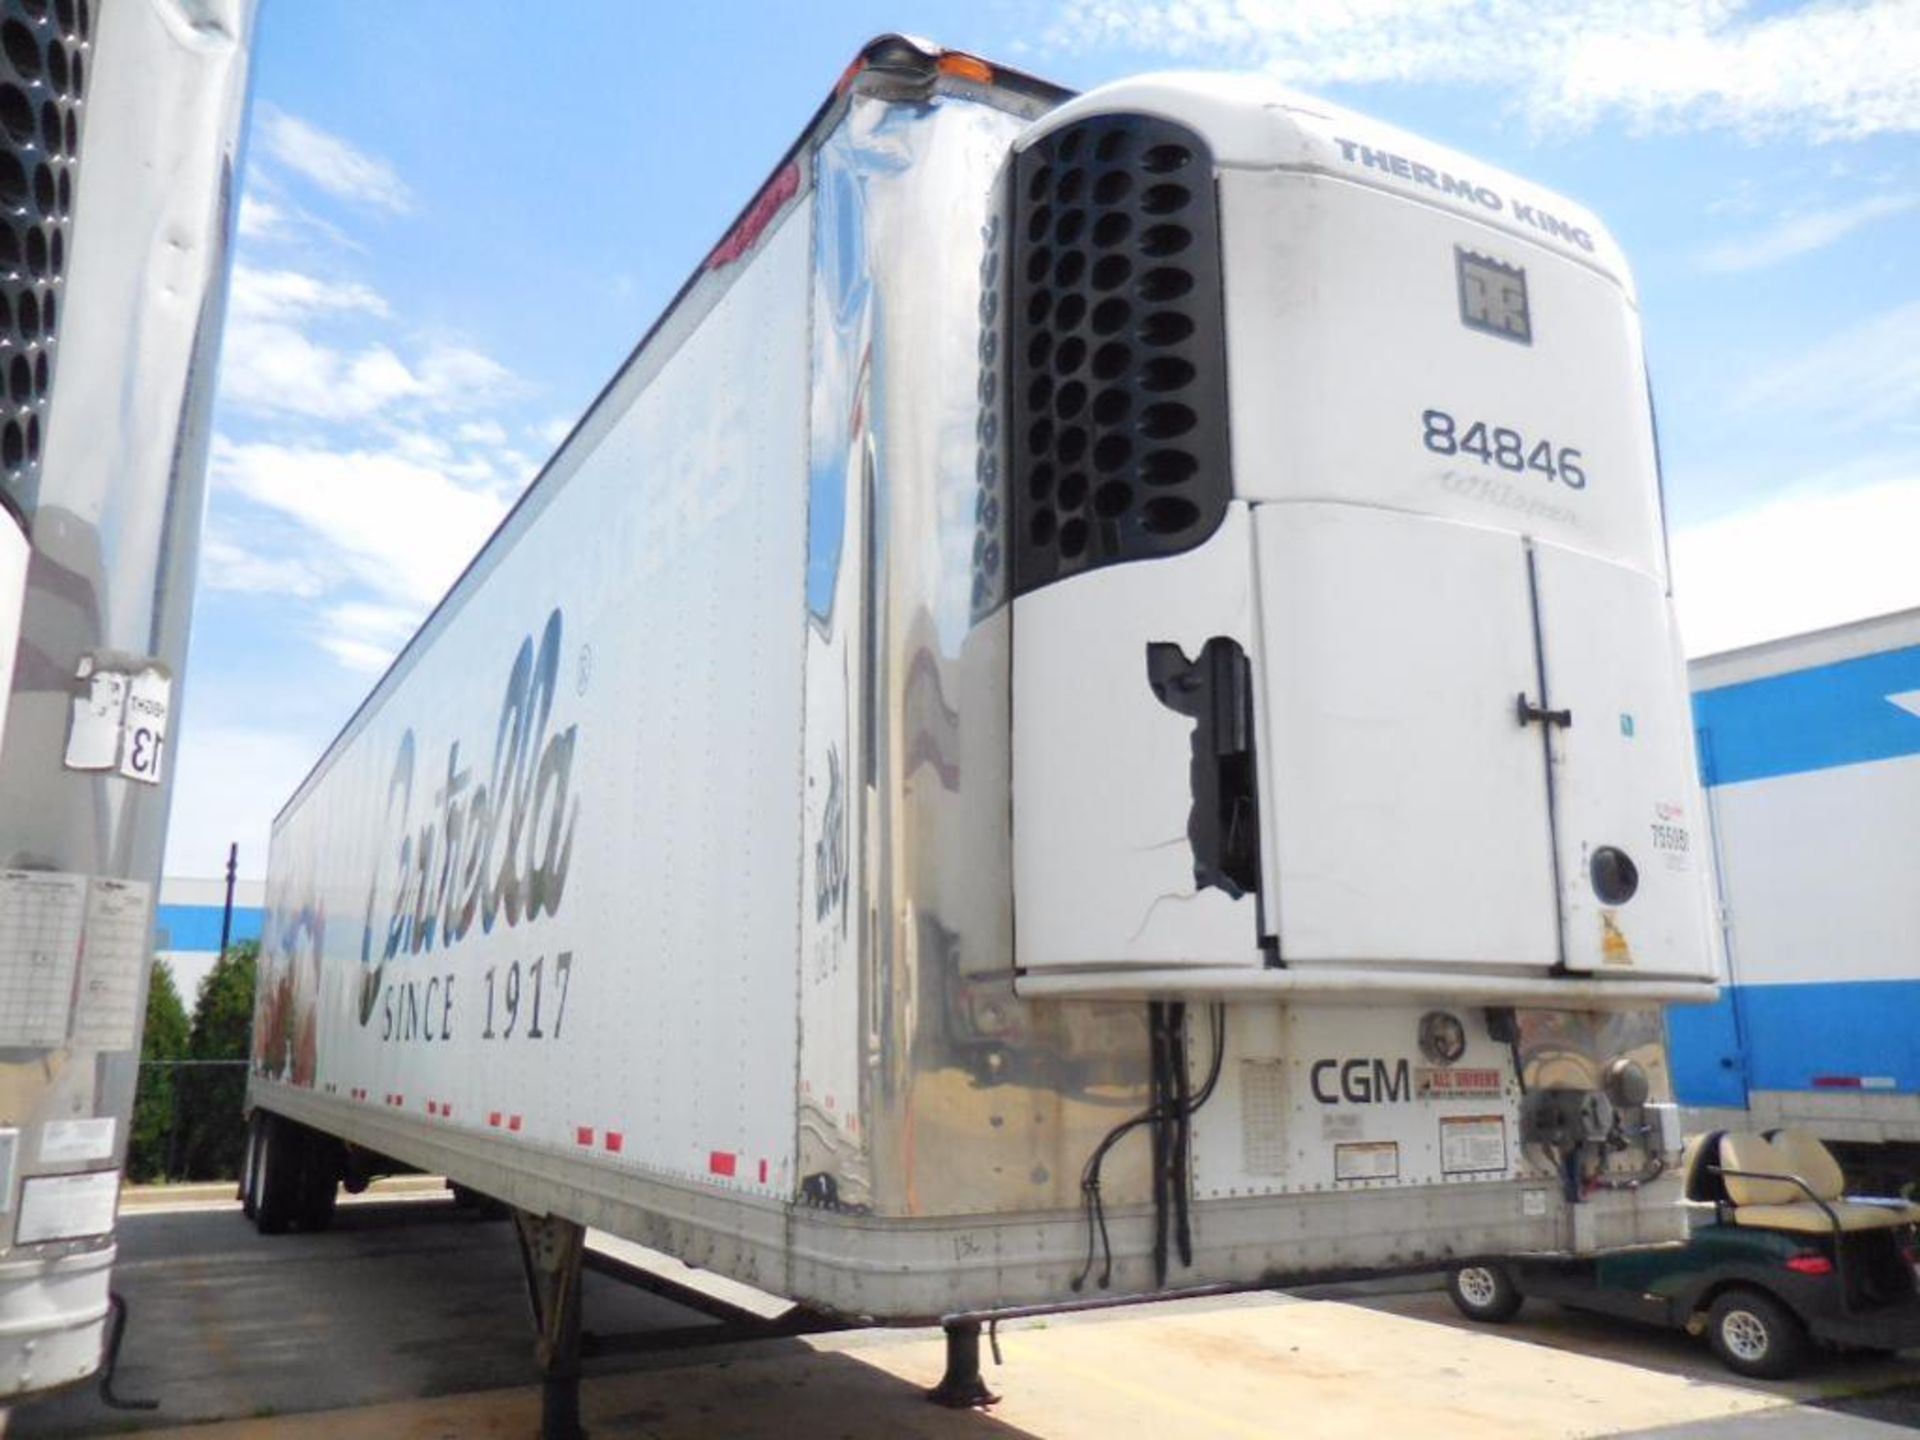 2004 Great Dane 48' Refrigerated Trailer, VIN # 1GRAA96235B703110, Unit 84846 - Image 3 of 17